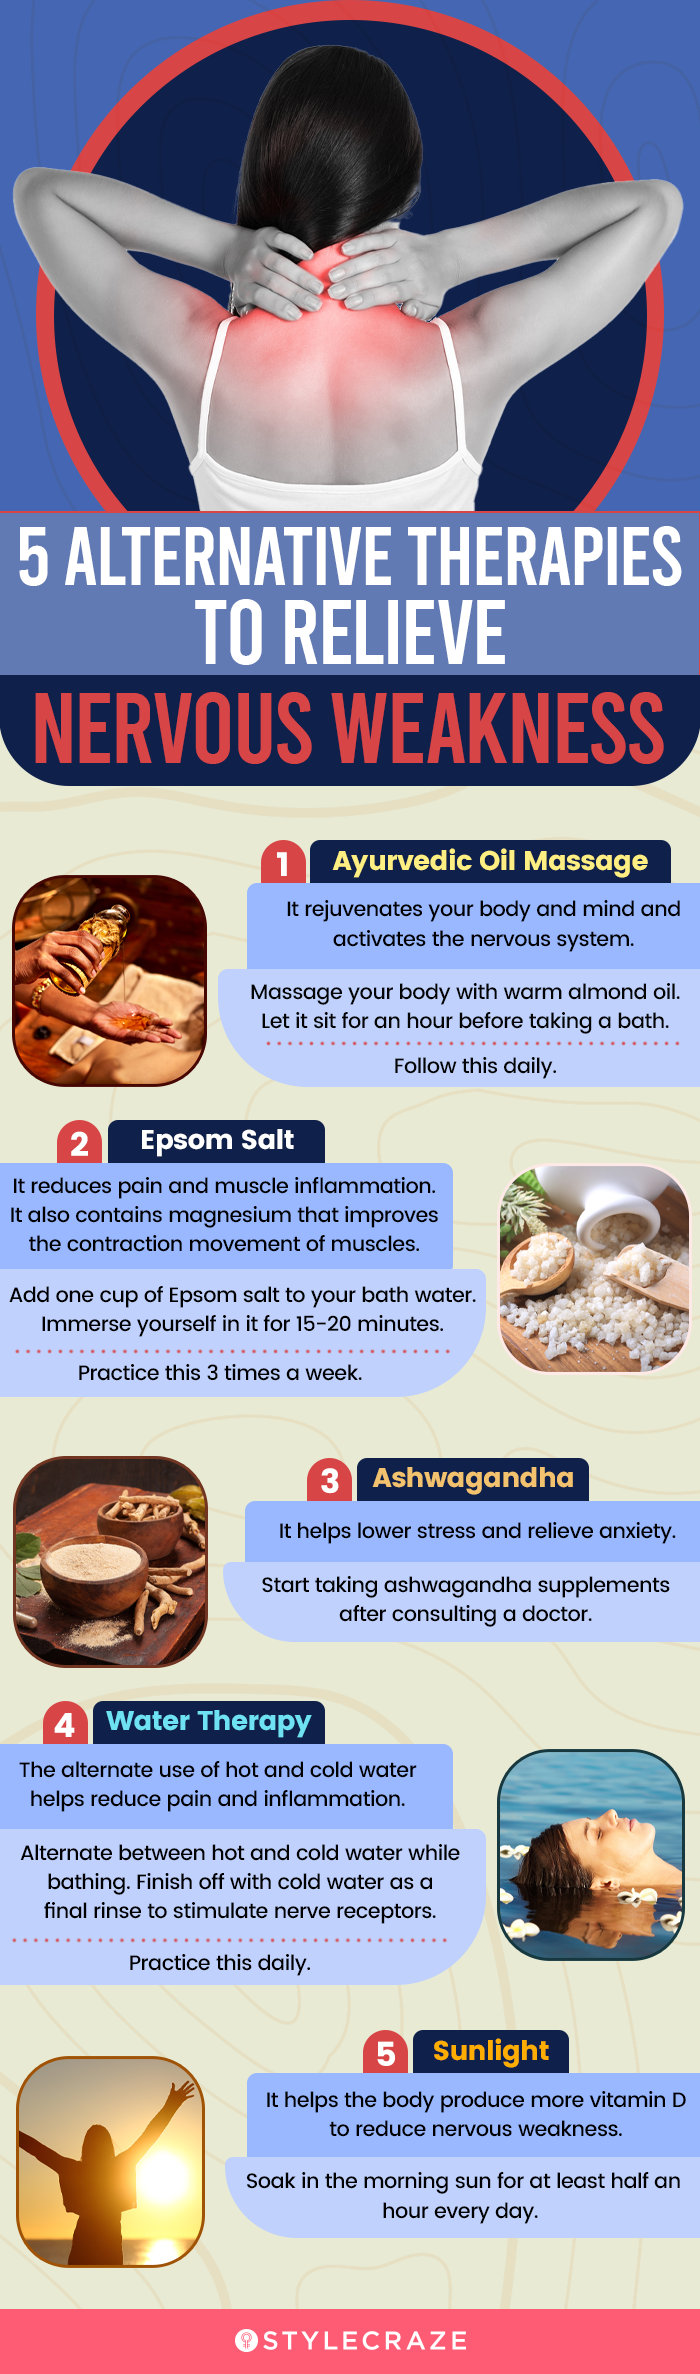 5 alternative therapies to relieve nervous weakness (infographic)